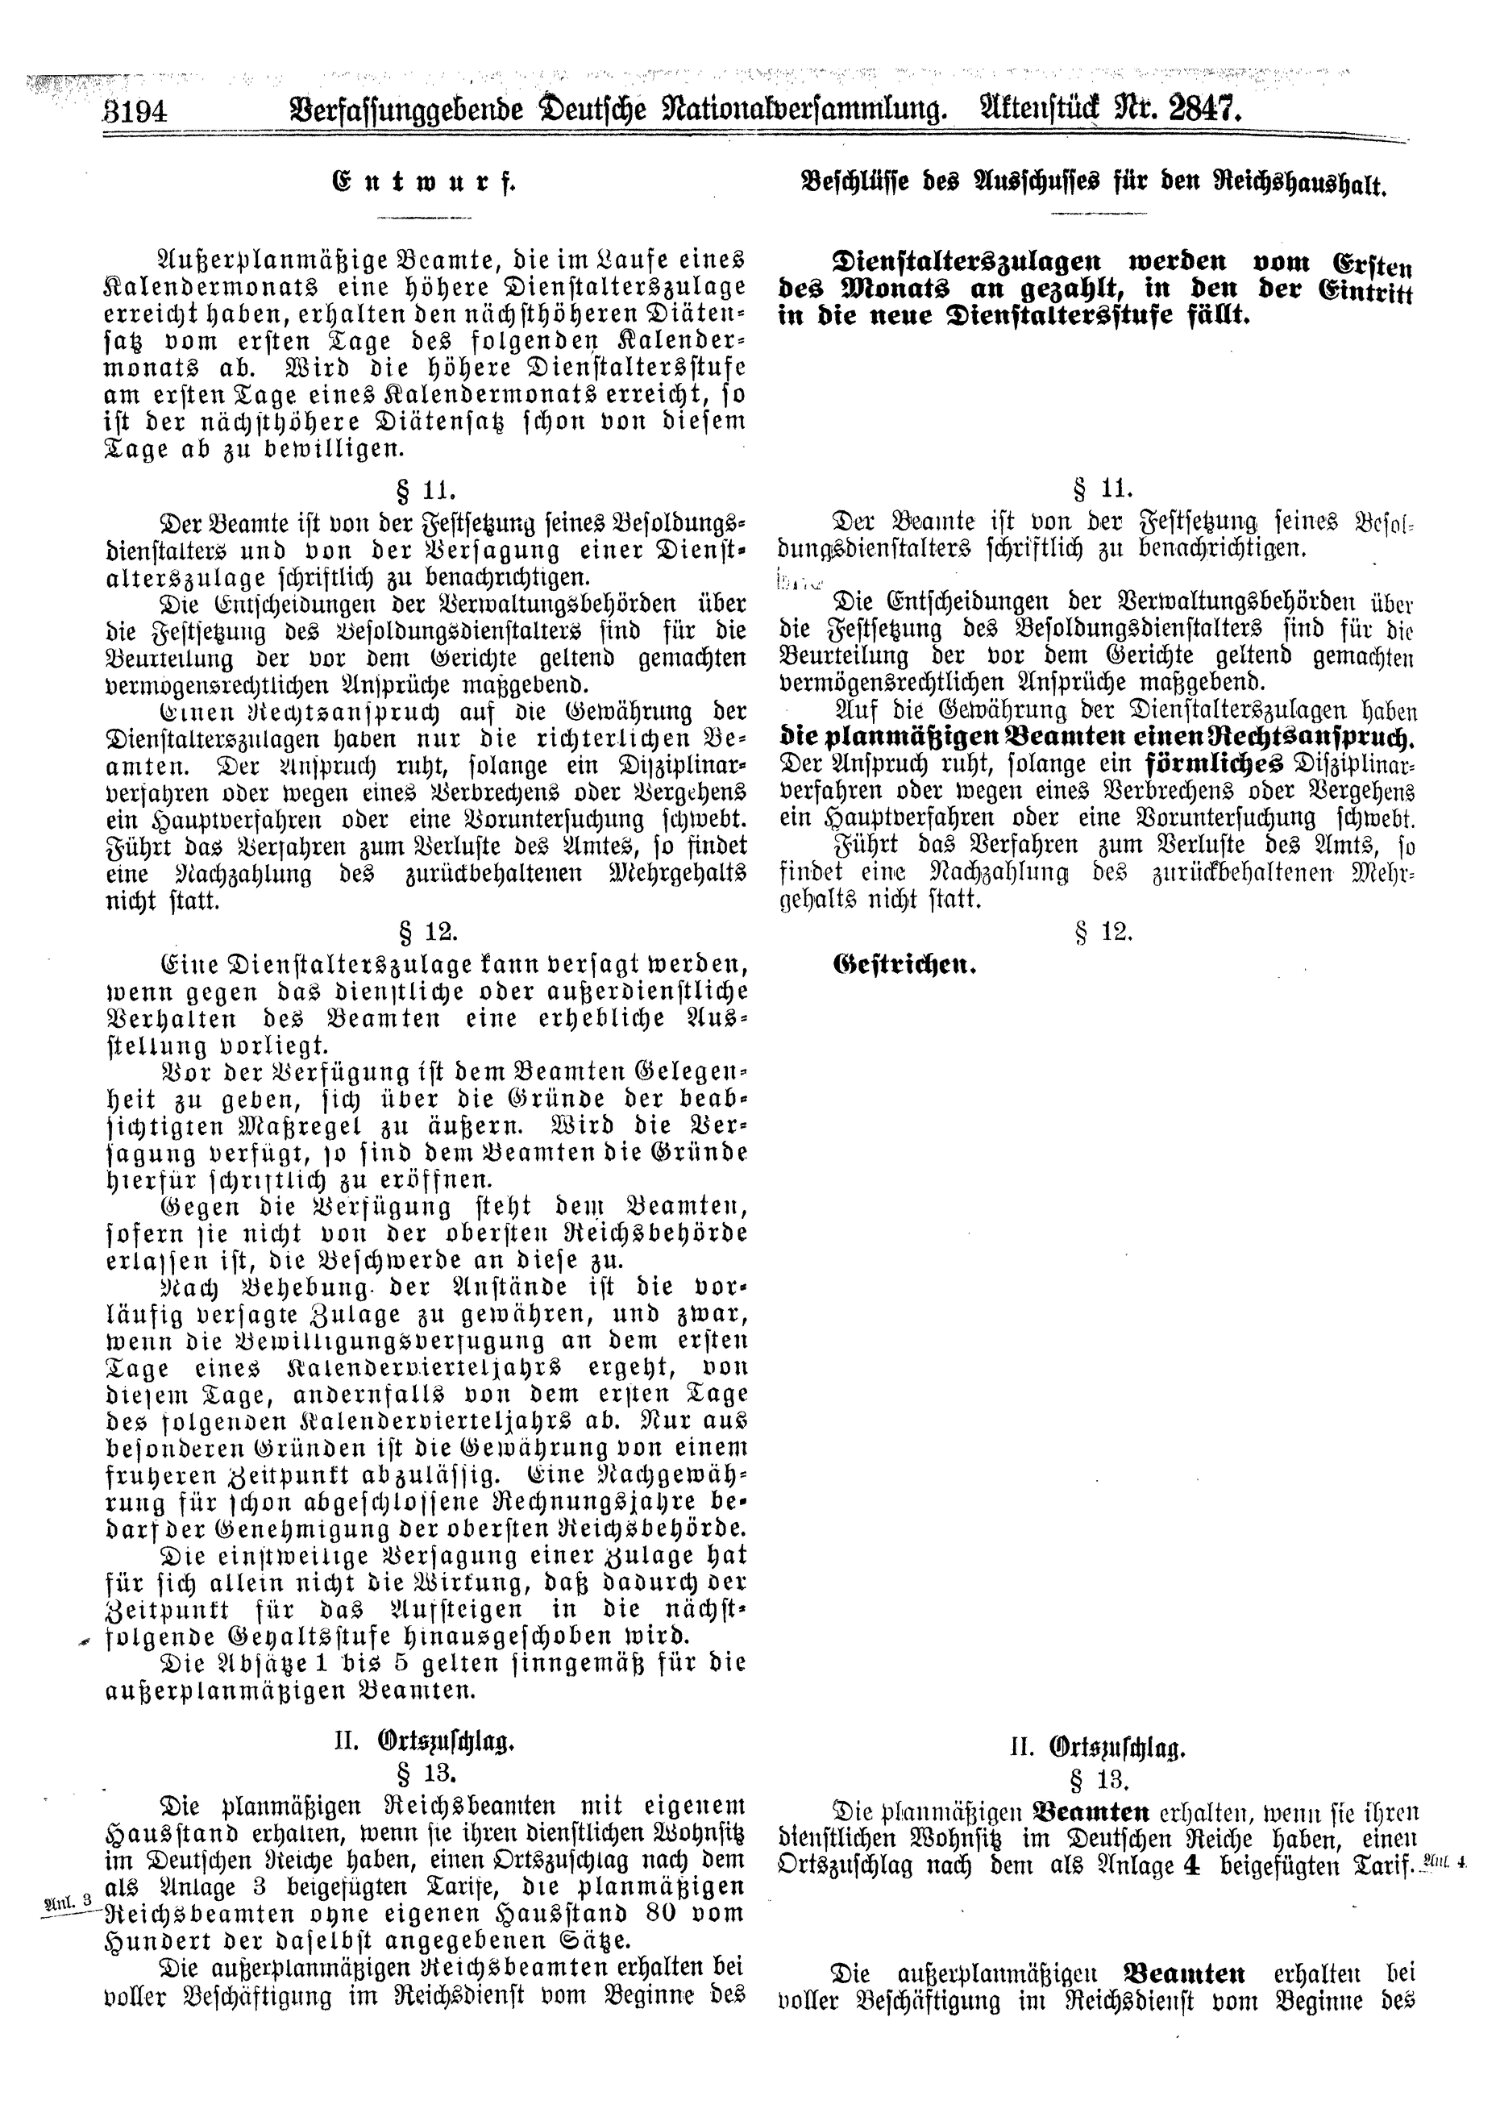 Scan of page 3194